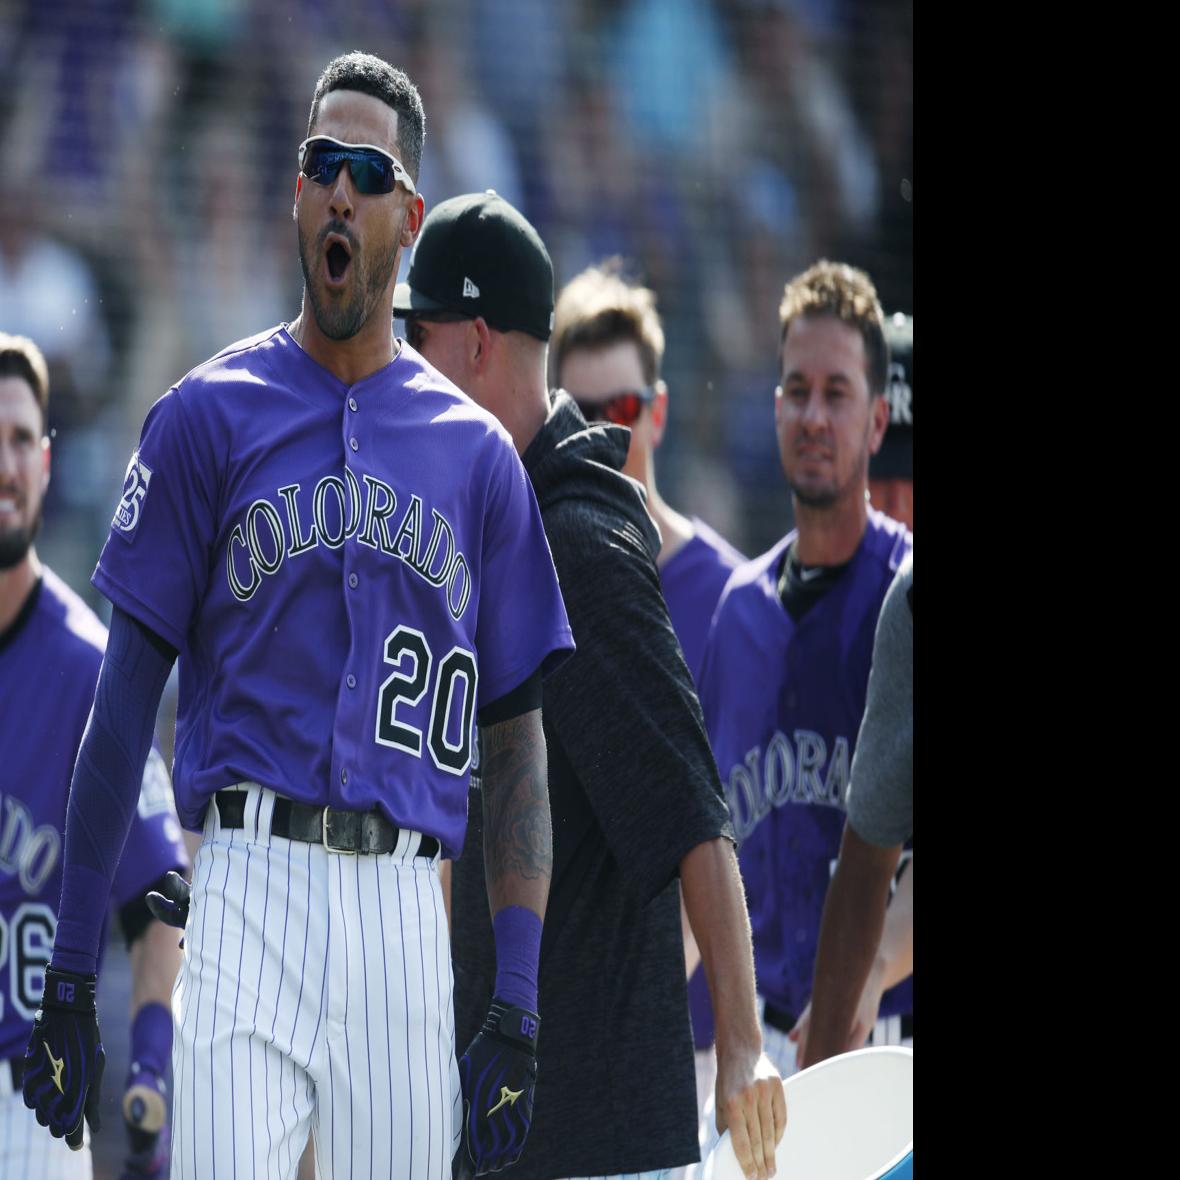 Ian Desmond won't play in the upcoming MLB season, citing racism